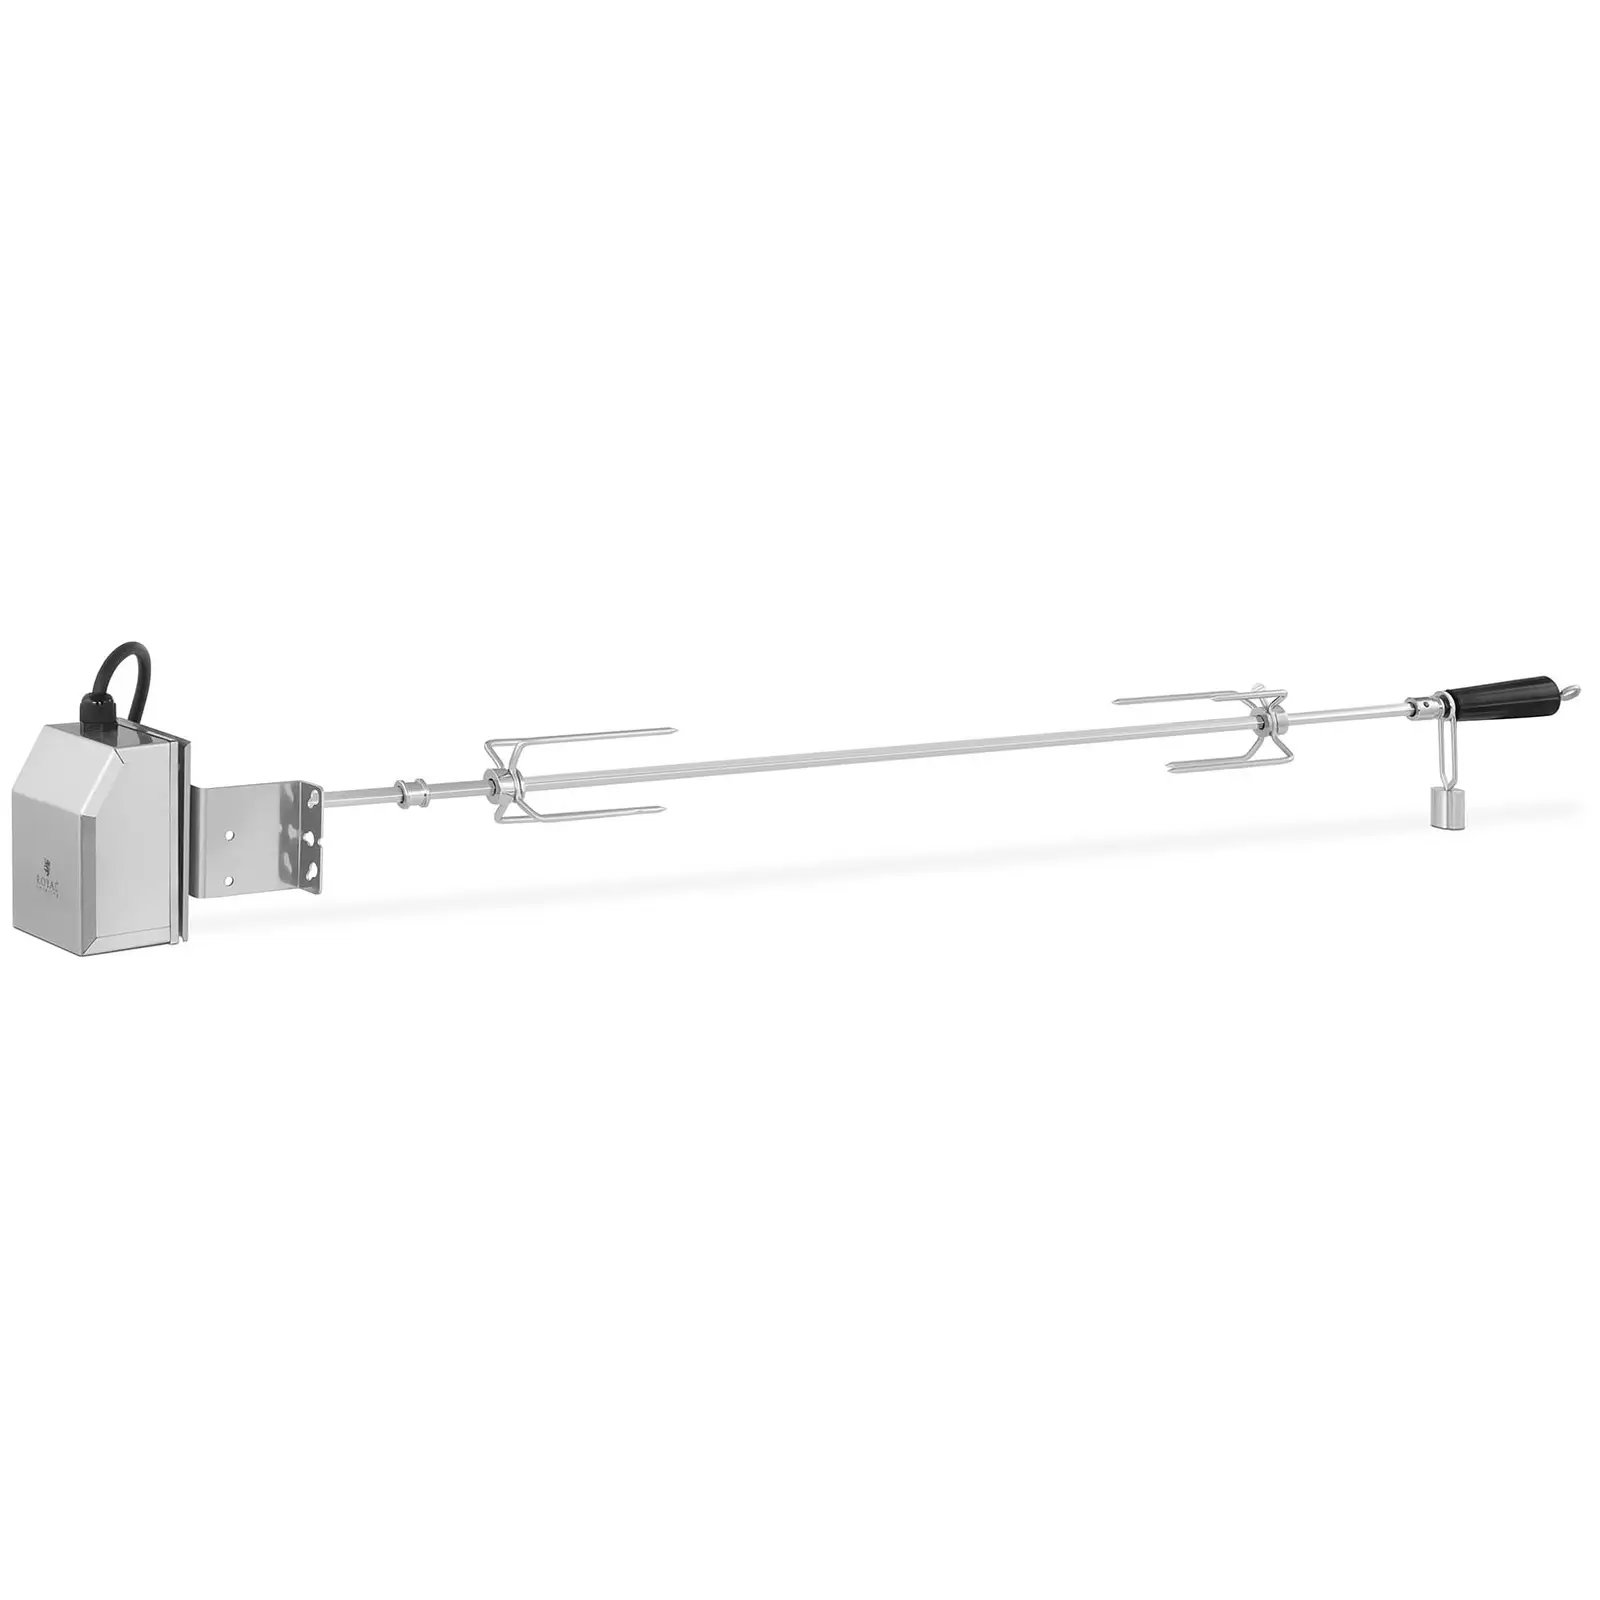 Rotisserie Spit with Motor - 140 cm